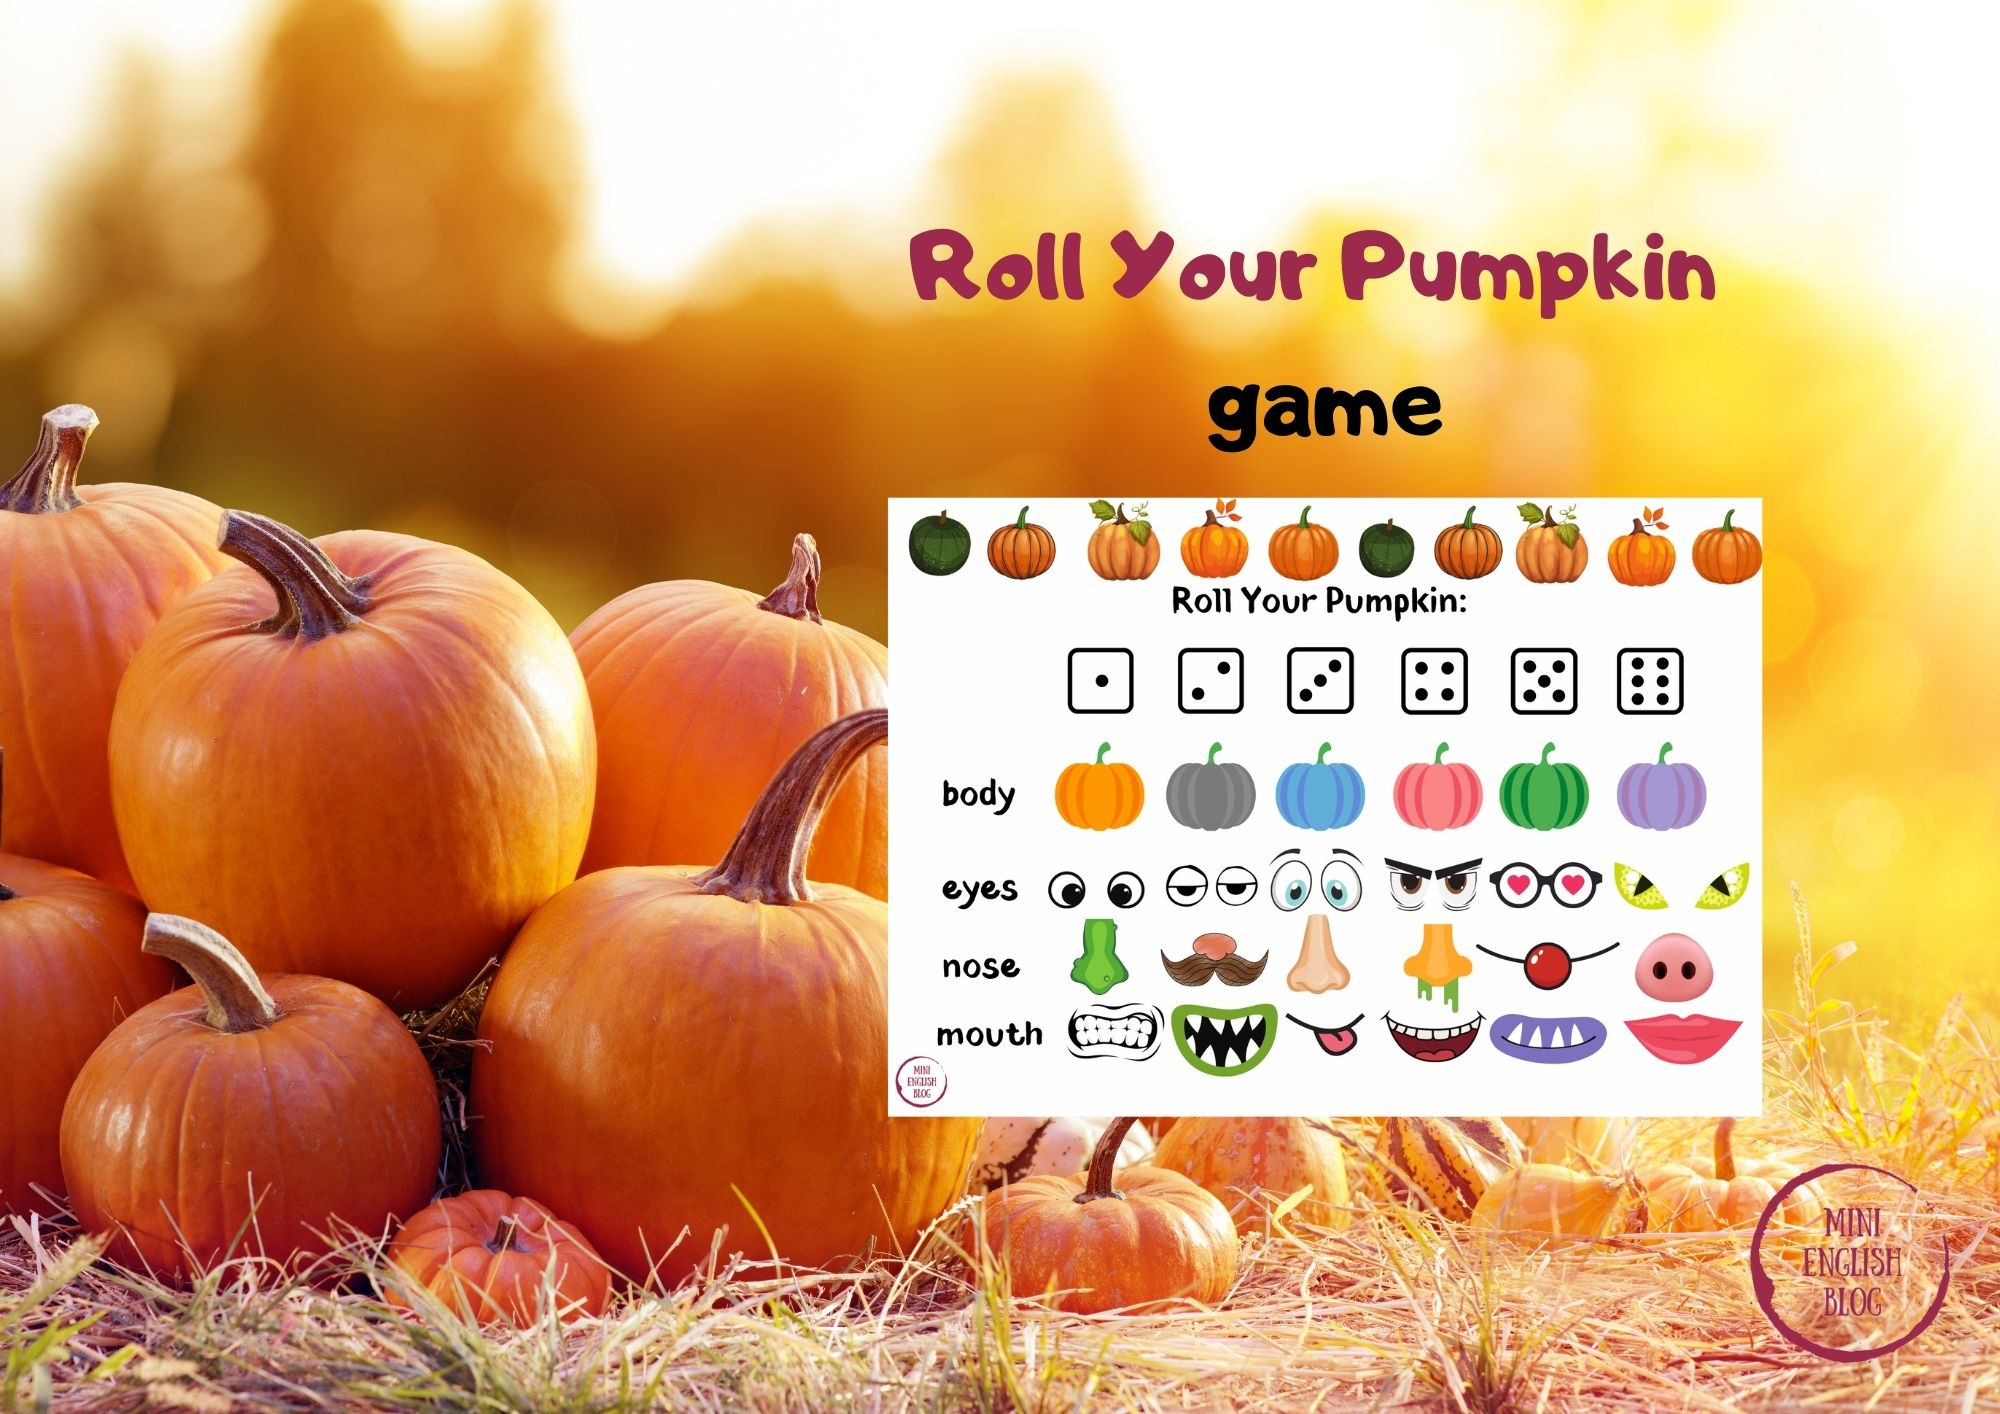 Roll your pumpkin game